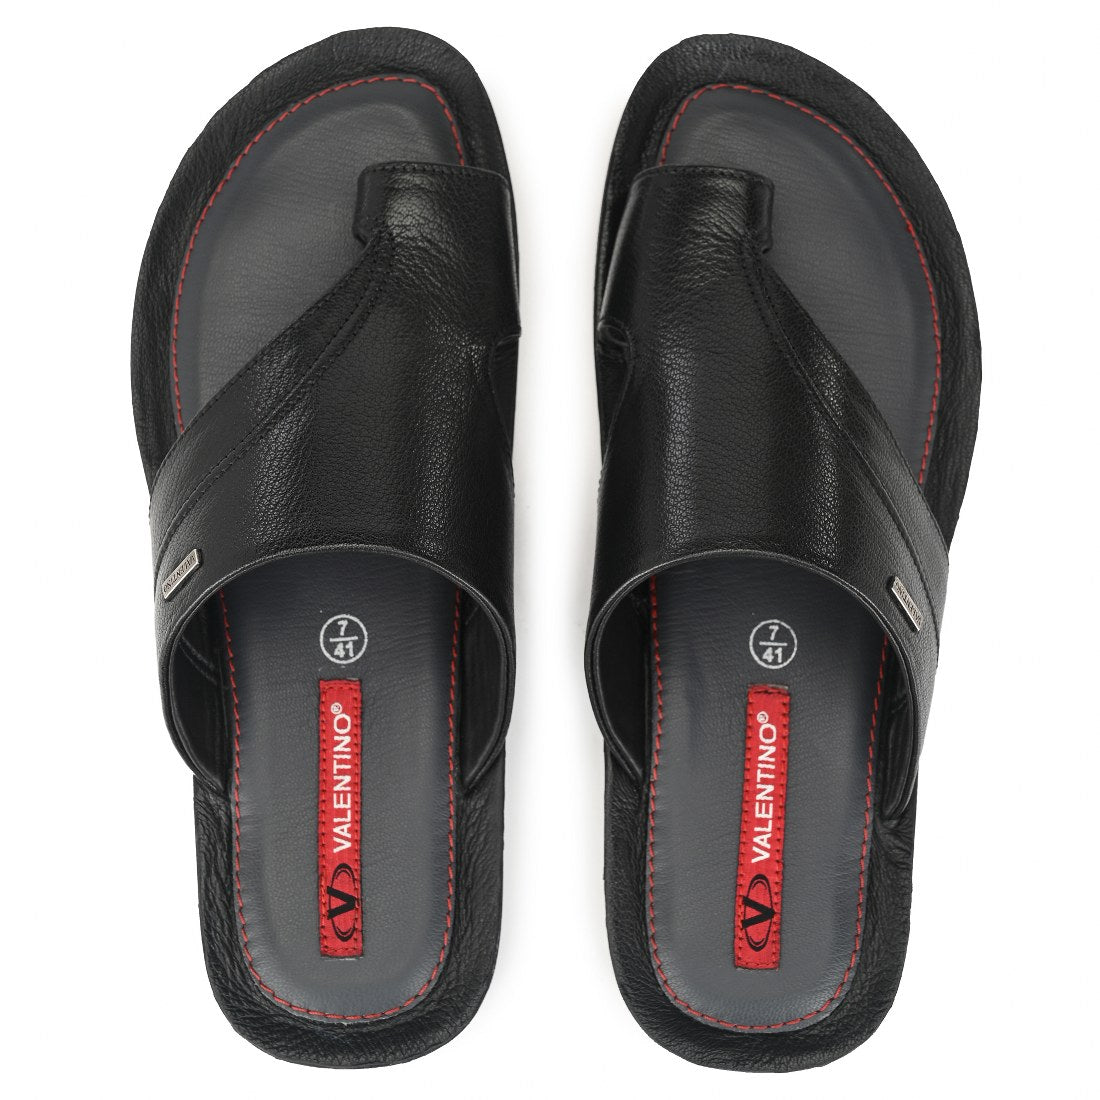 CHILL OUT-21 MEN LEATHER BLACK CASUAL SLIPPER THONG